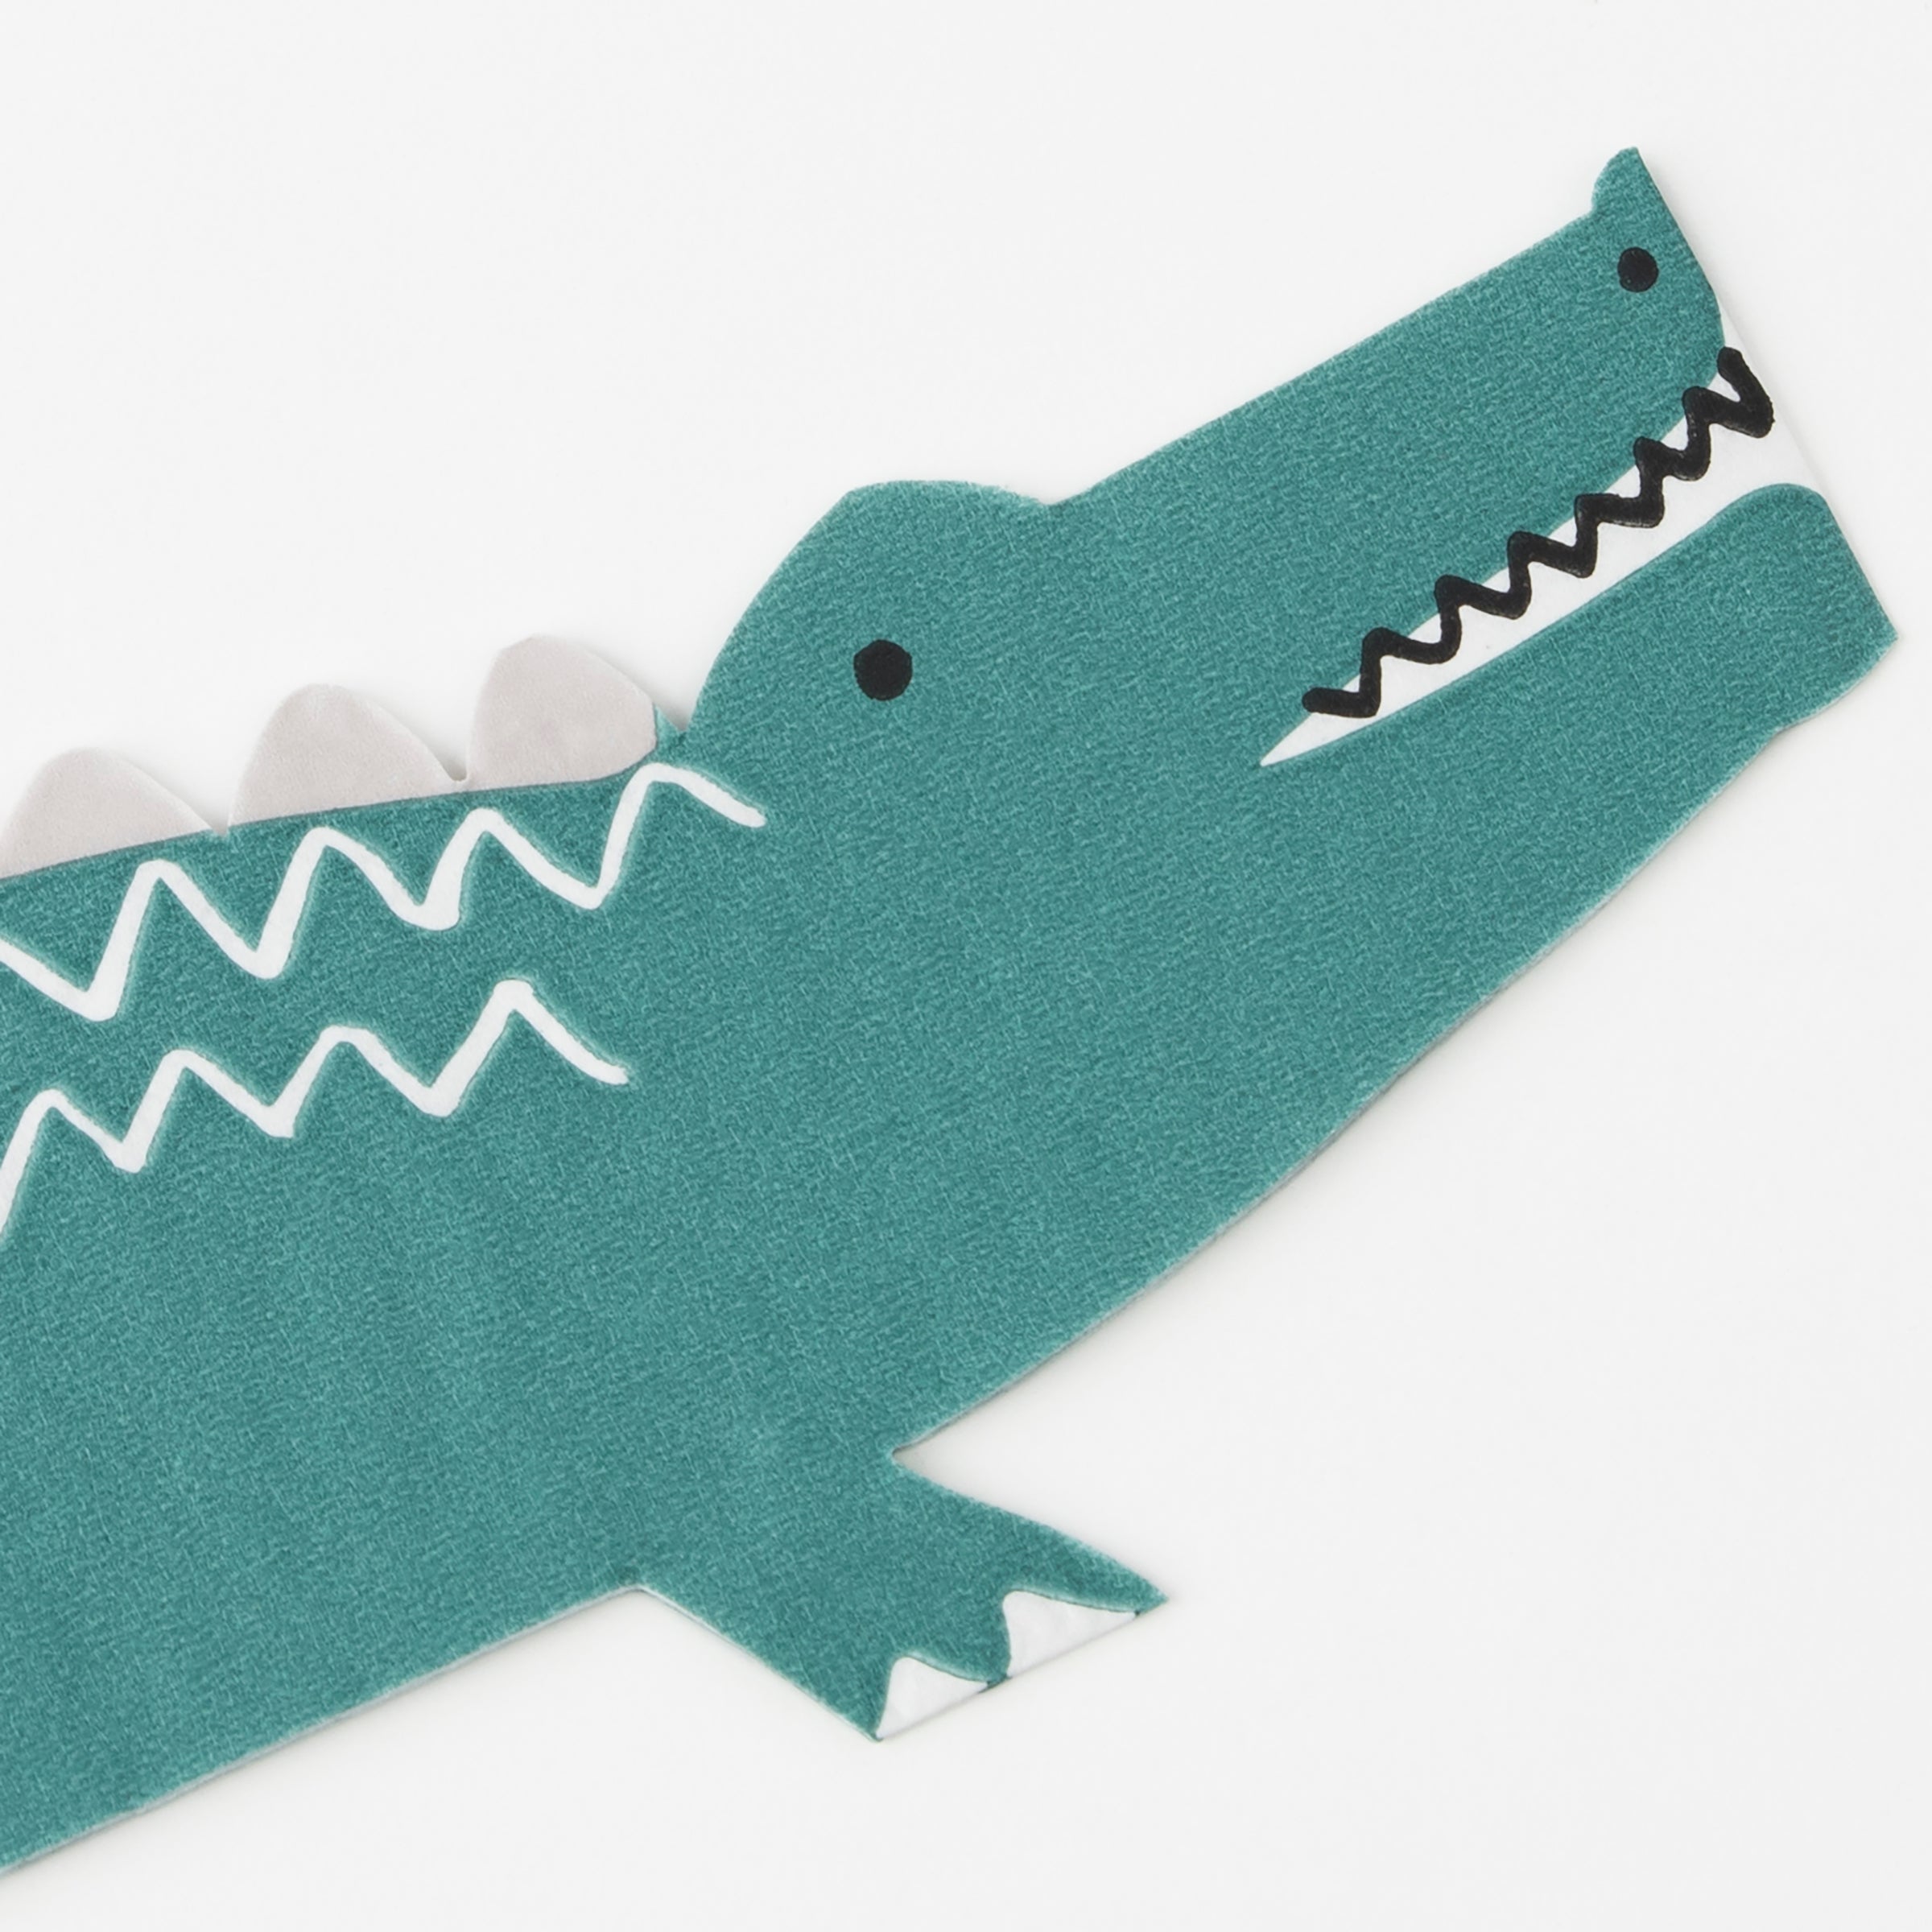 Our paper napkins, in the shape of crocodiles, are ideal for a safari birthday party.